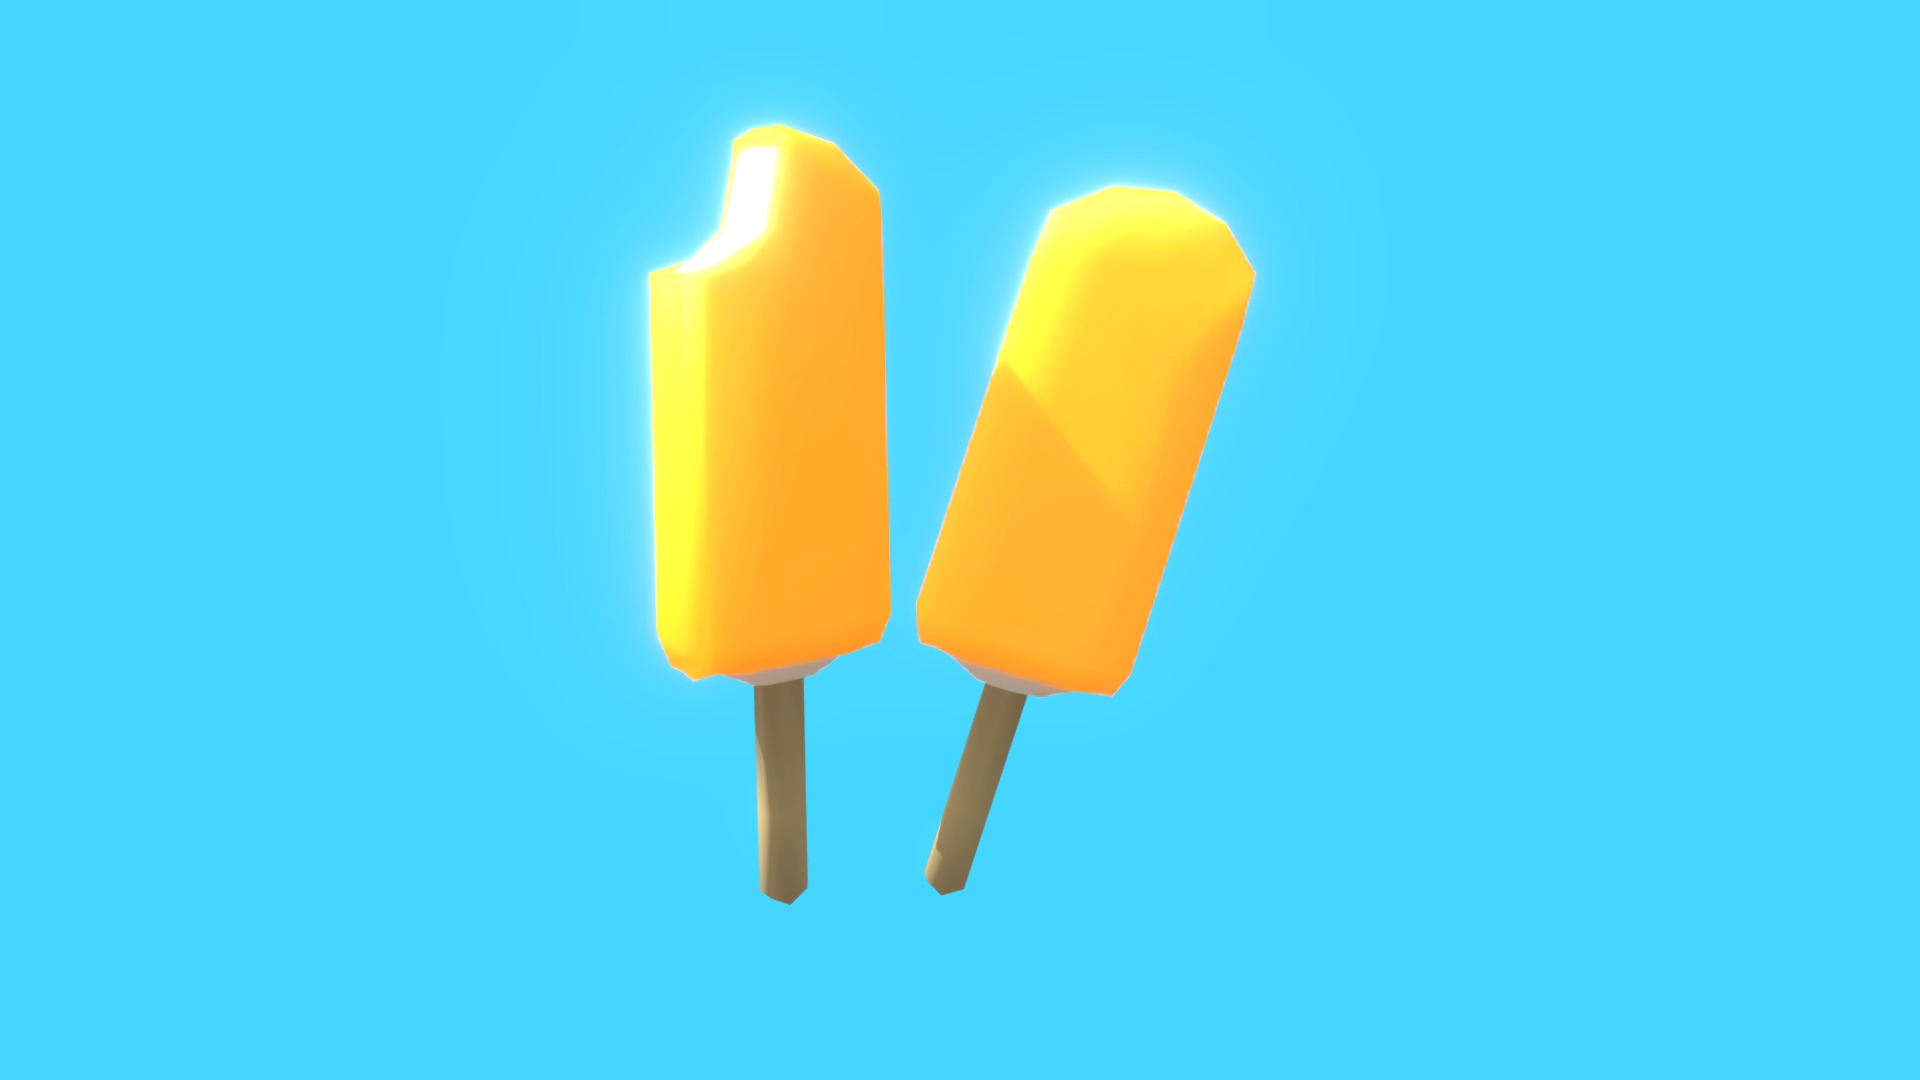 3D model Orange Creamsicles - This is a 3D model of the Orange Creamsicles. The 3D model is about two yellow cones on a blue background.